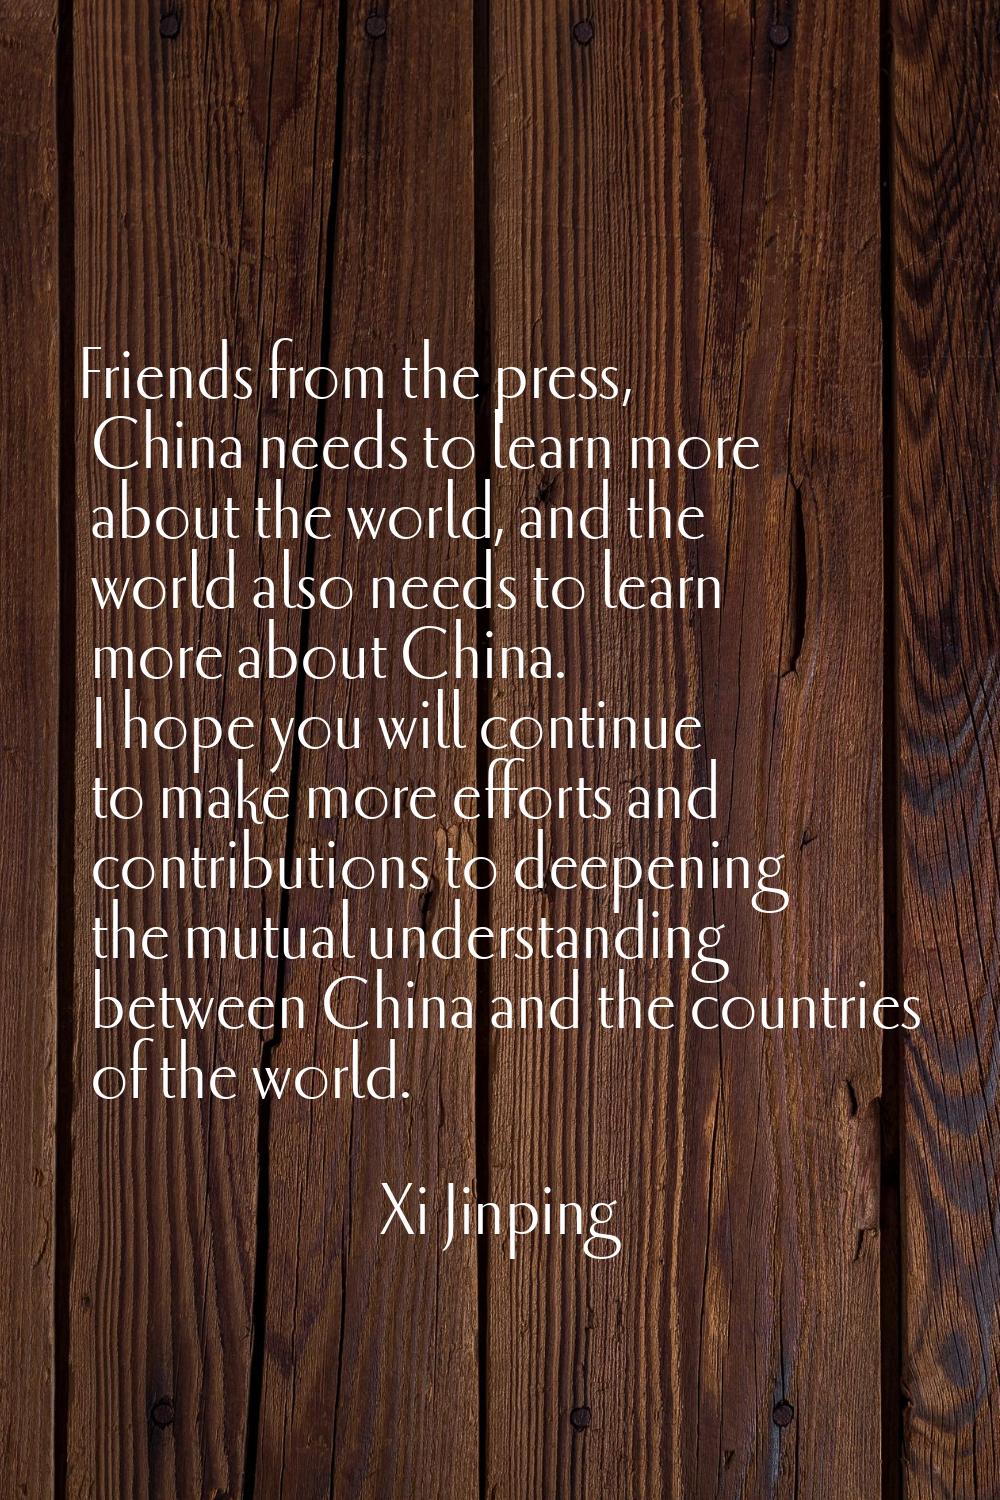 Friends from the press, China needs to learn more about the world, and the world also needs to lear